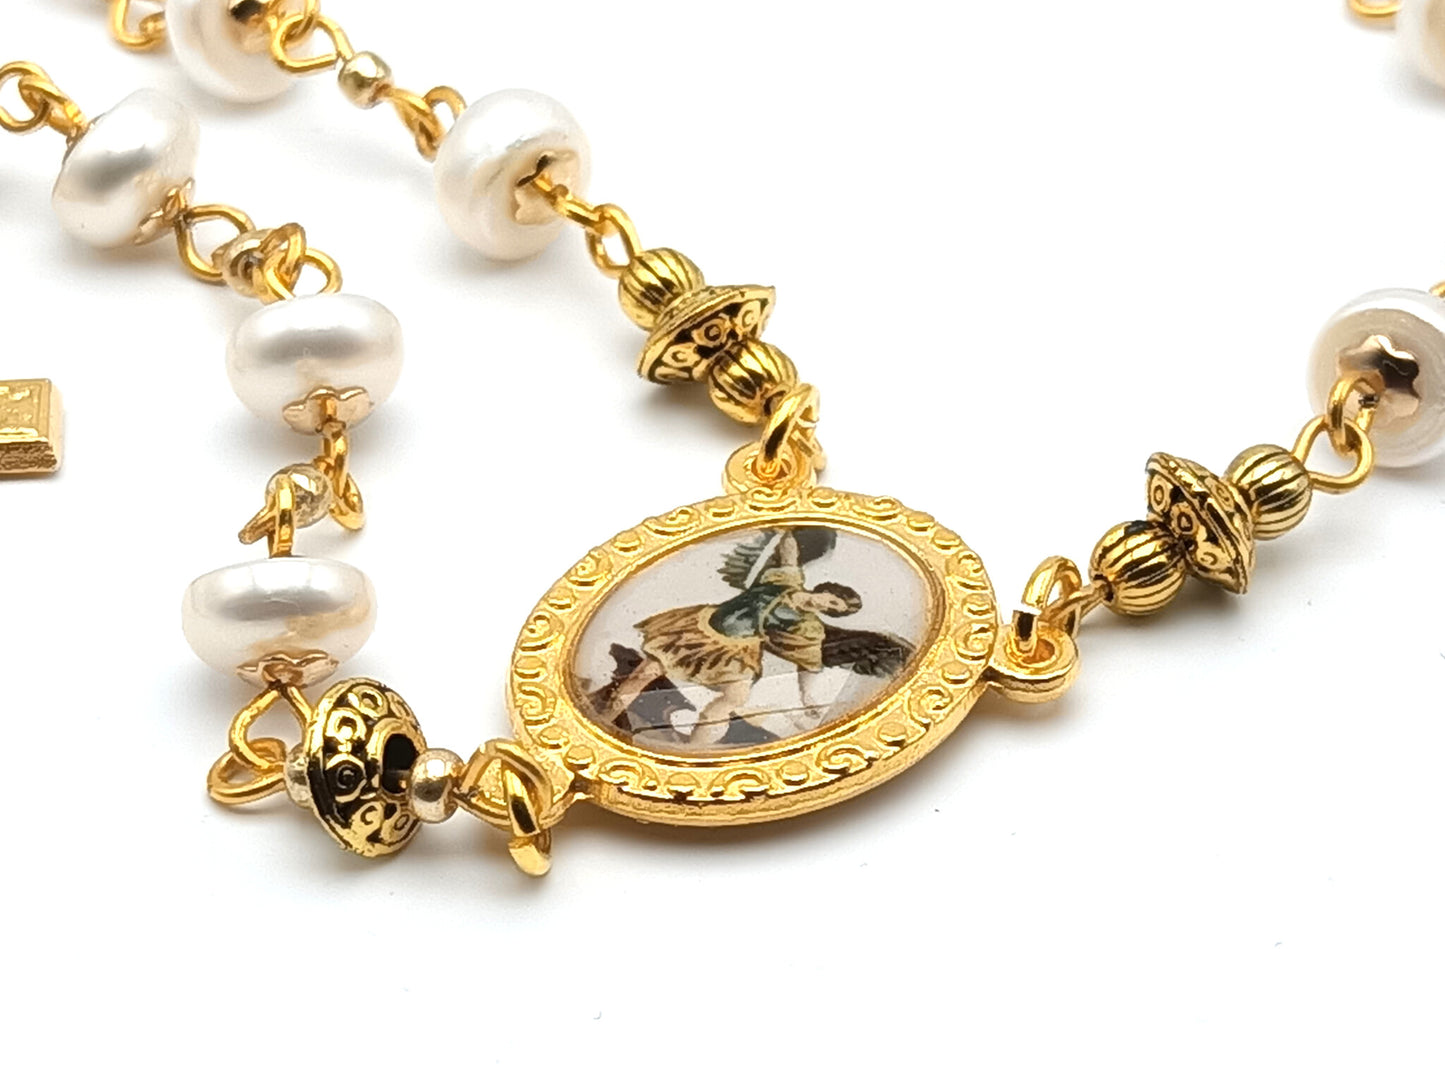 Saint Michael unique rosary beads single decade with pearl beads, gold plated crucifix, miraculous medal and Saint Michael picture centre medal.